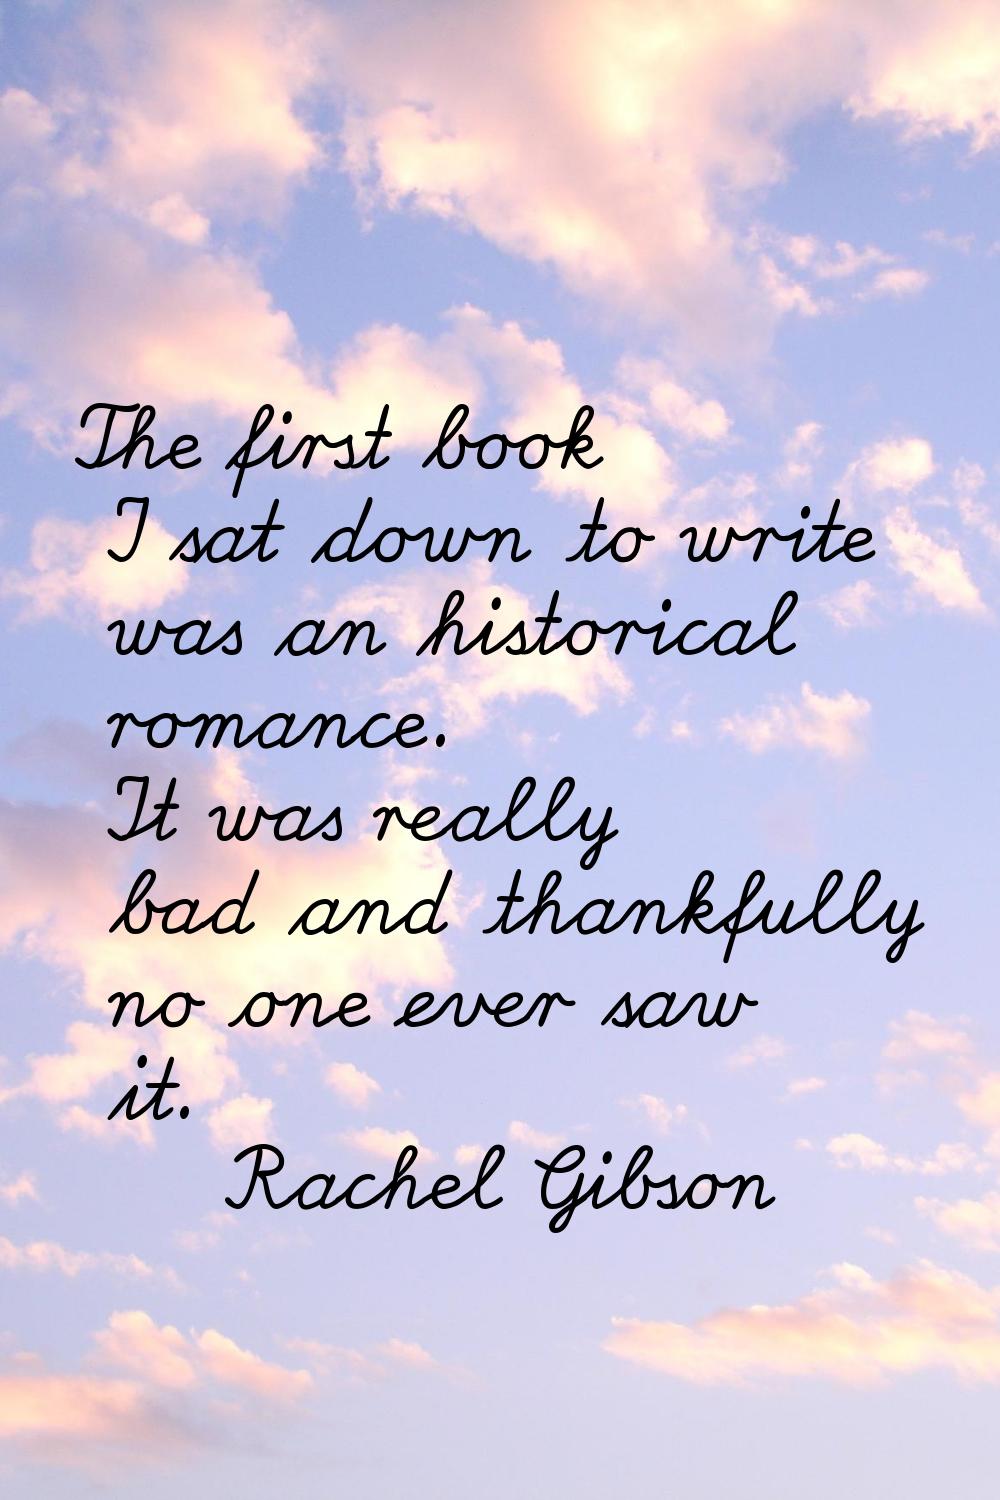 The first book I sat down to write was an historical romance. It was really bad and thankfully no o